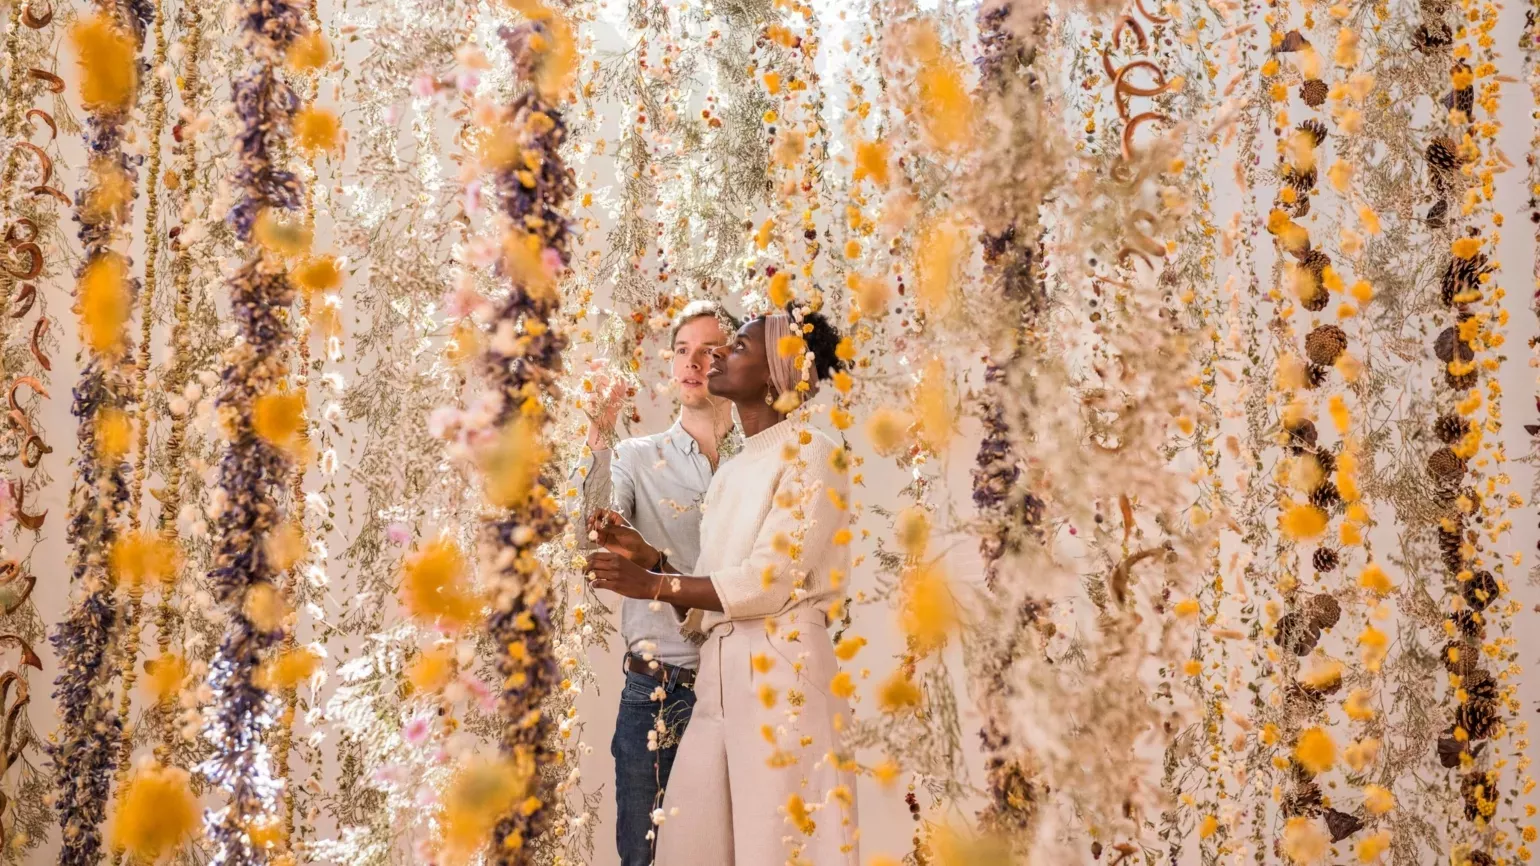 'Life in death,' a temporary installation of 1,000 flower garlands by Rebecca Louise Law at the Shirley Sherwood Gallery of Botanical Art 